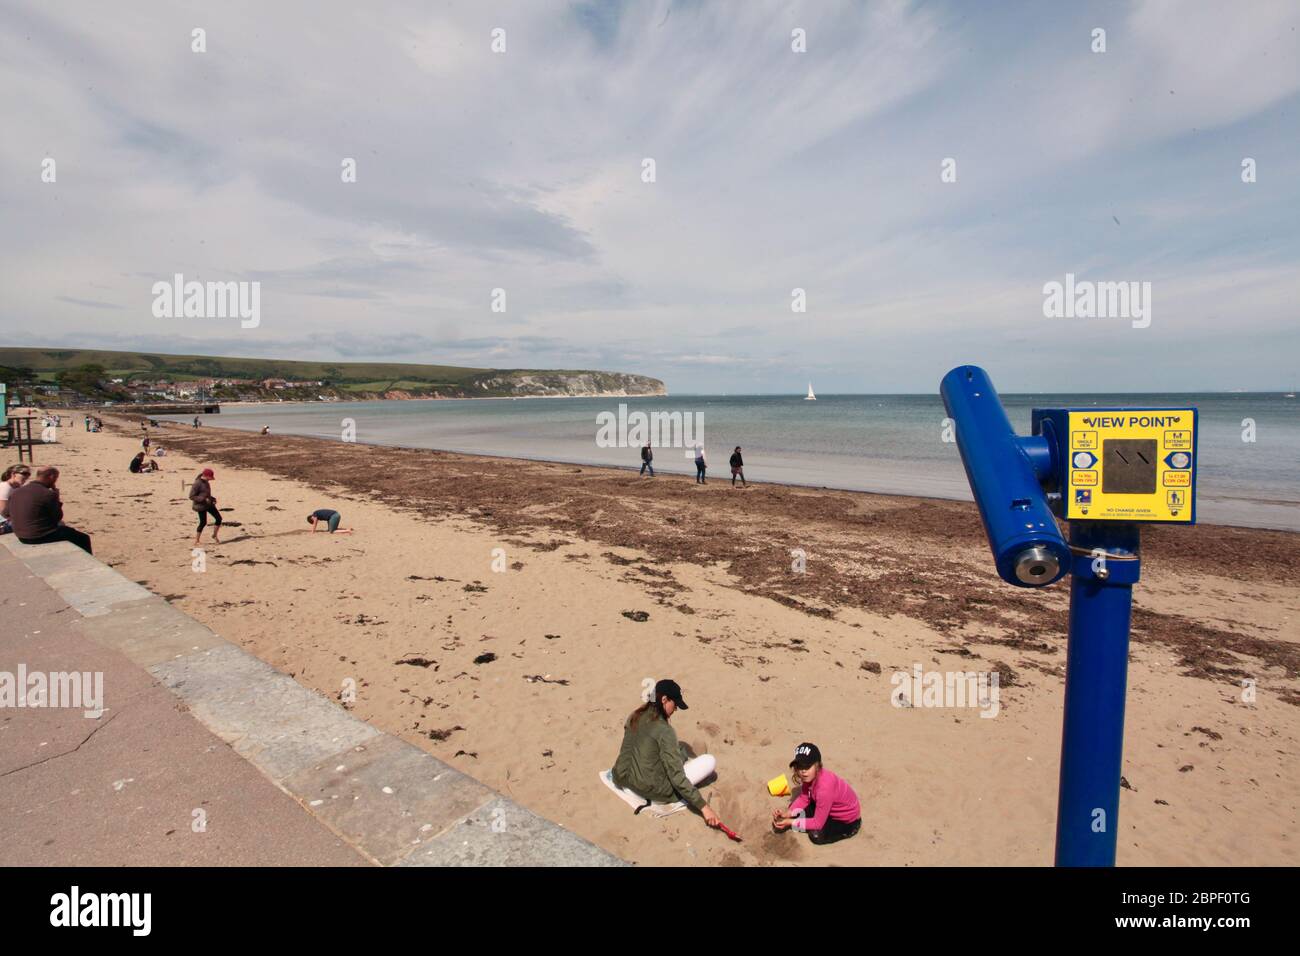 Swanage Bay during Coronavirus lockdown, Dorset UK May 2020.  As restrictions are eased people are now allowed on the beaches - and to sunbathe Stock Photo